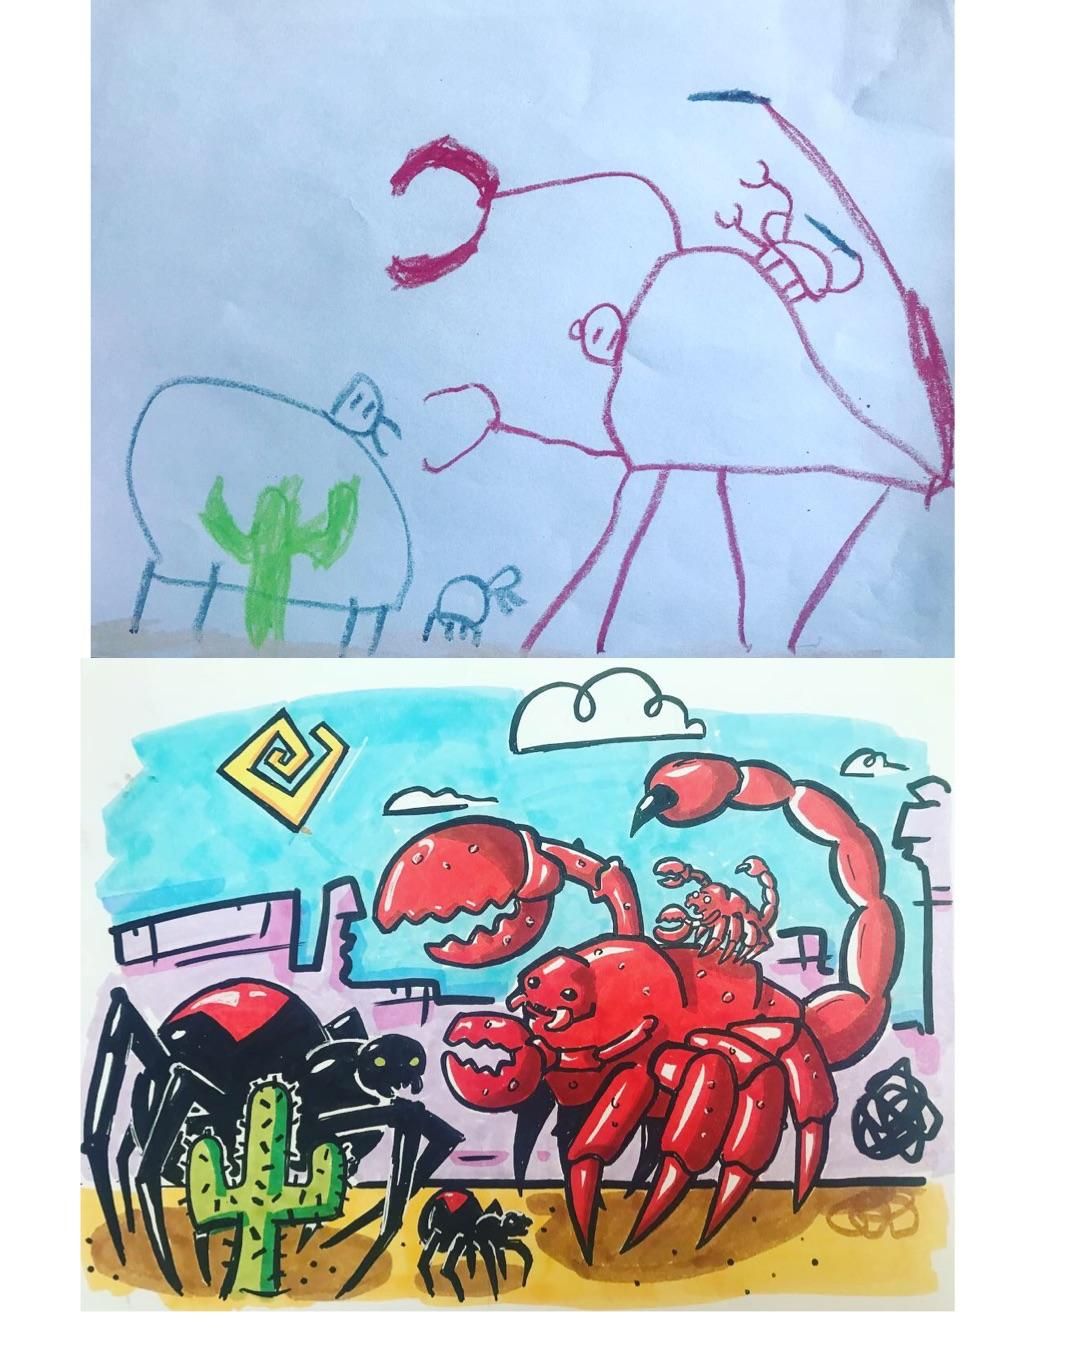 I reimagine drawings by my nephews here is a mama and baby spider vs a mama and baby scorpion